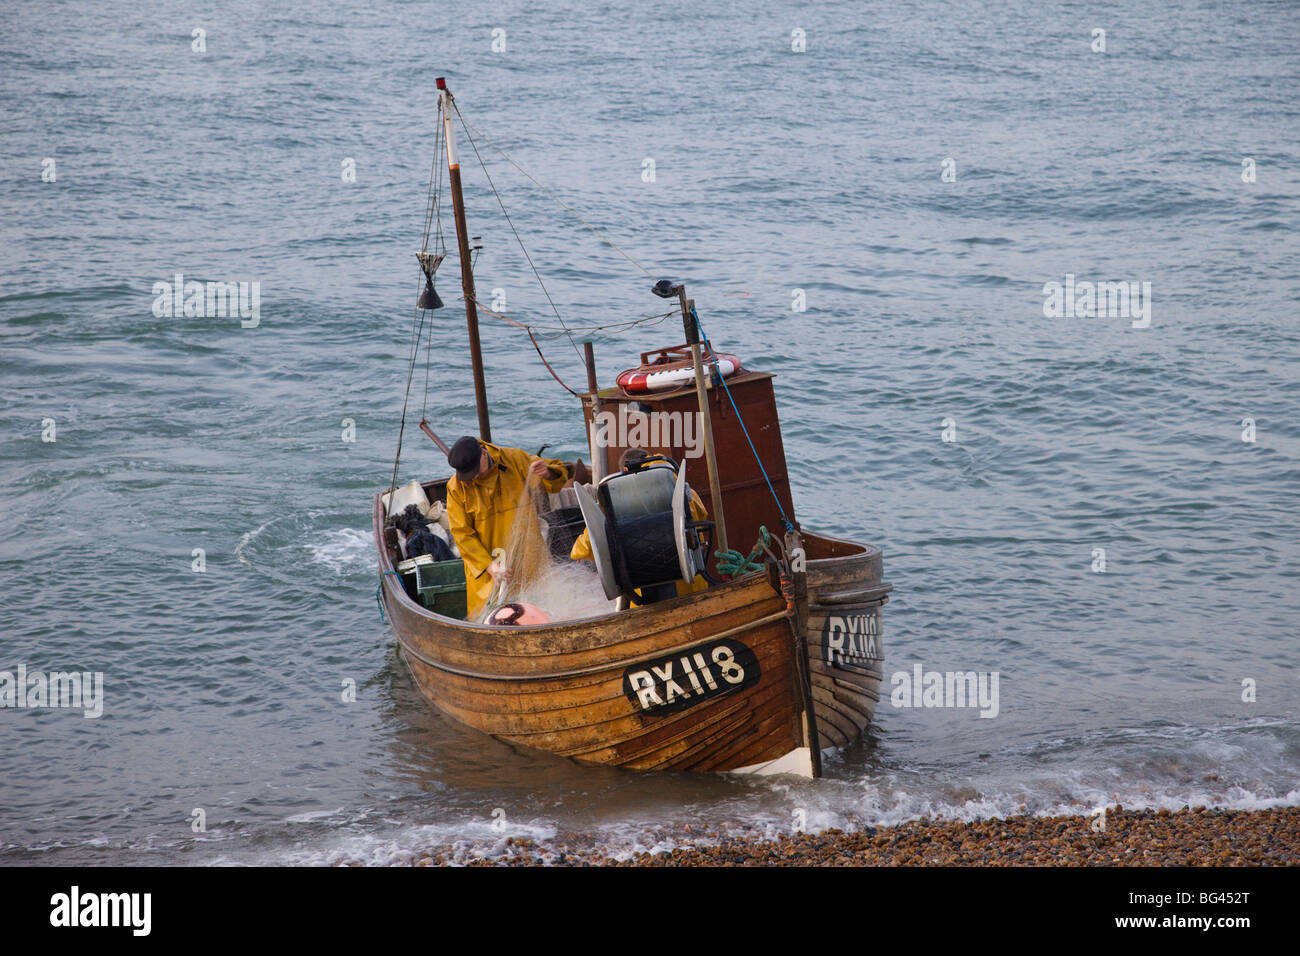 England, East Sussex, Hastings, Fishing Boat at Sea Stock Photo